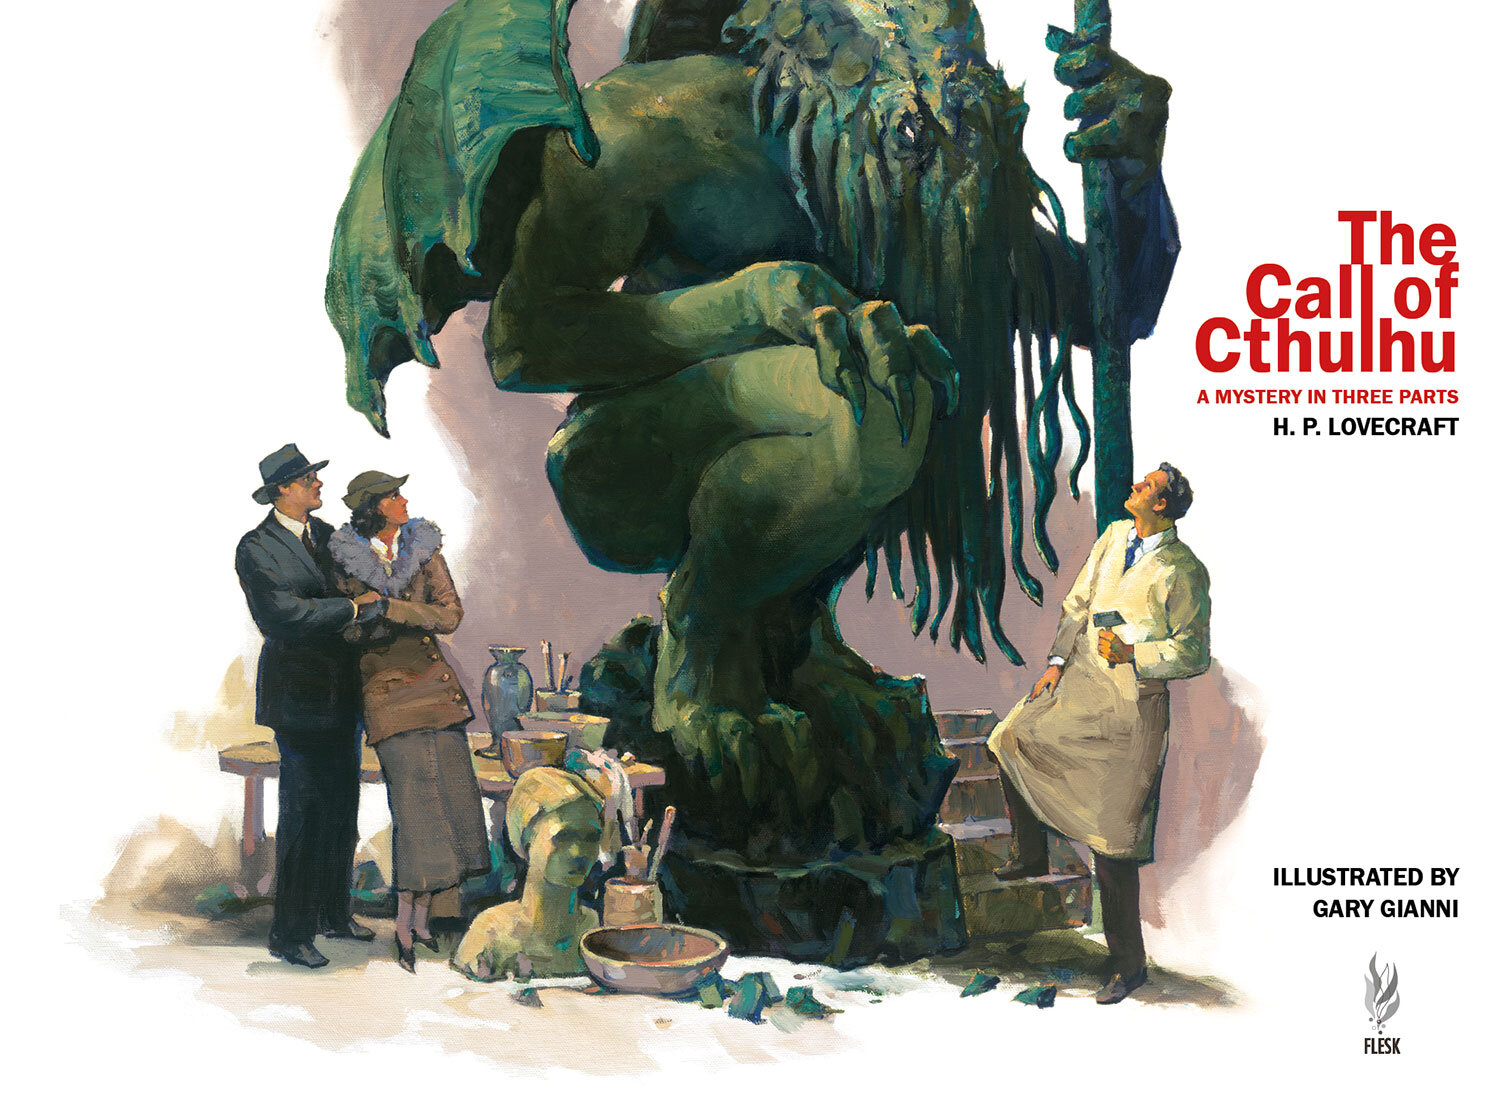 The Call of Cthulhu by H. P. Lovecraft. Illustrated by Gary Gianni — Flesk